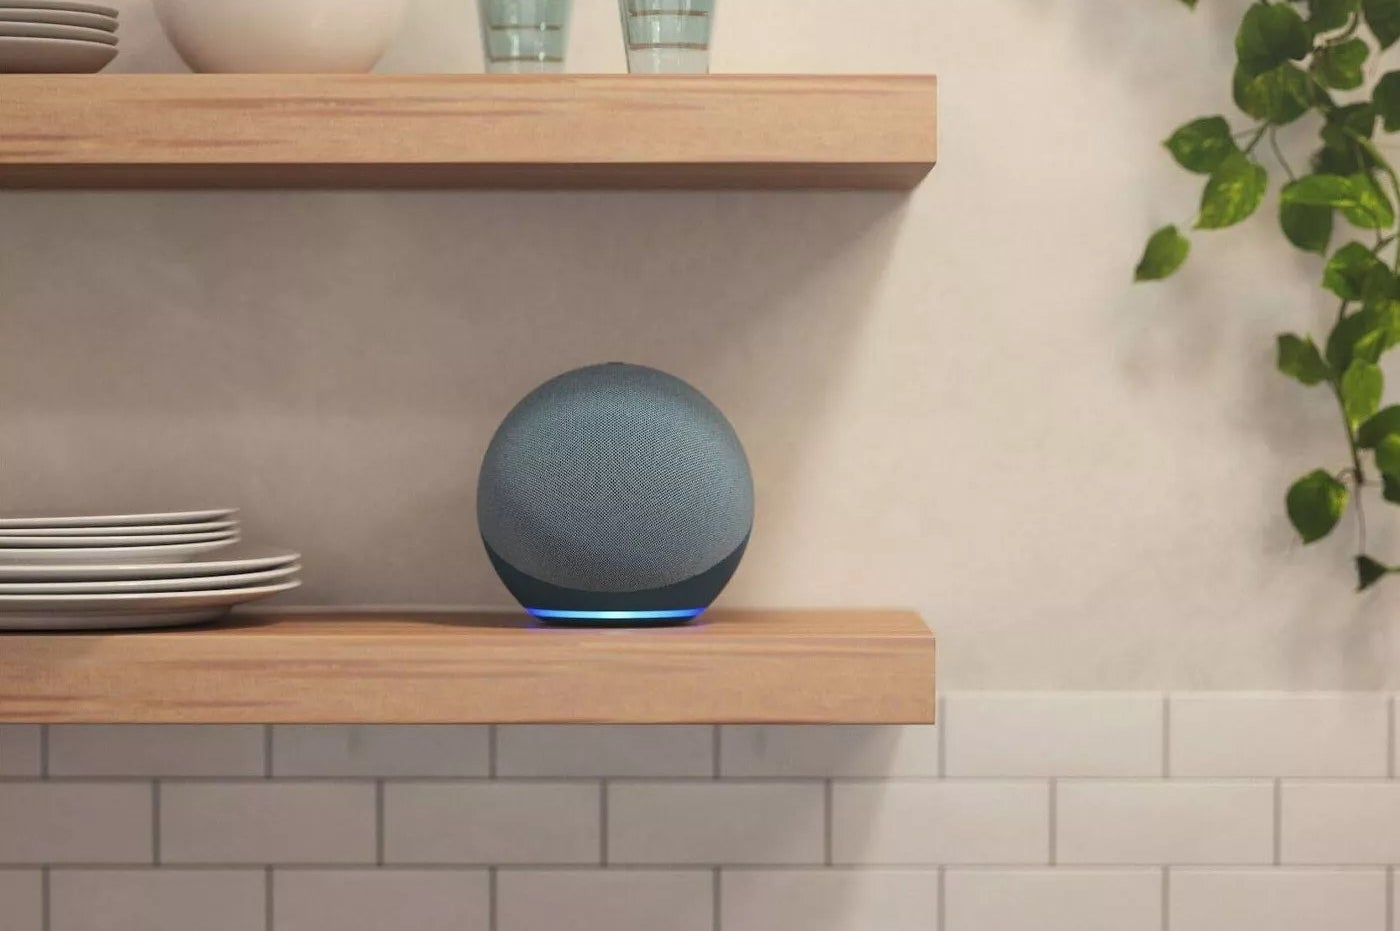 The smart home hub in blue